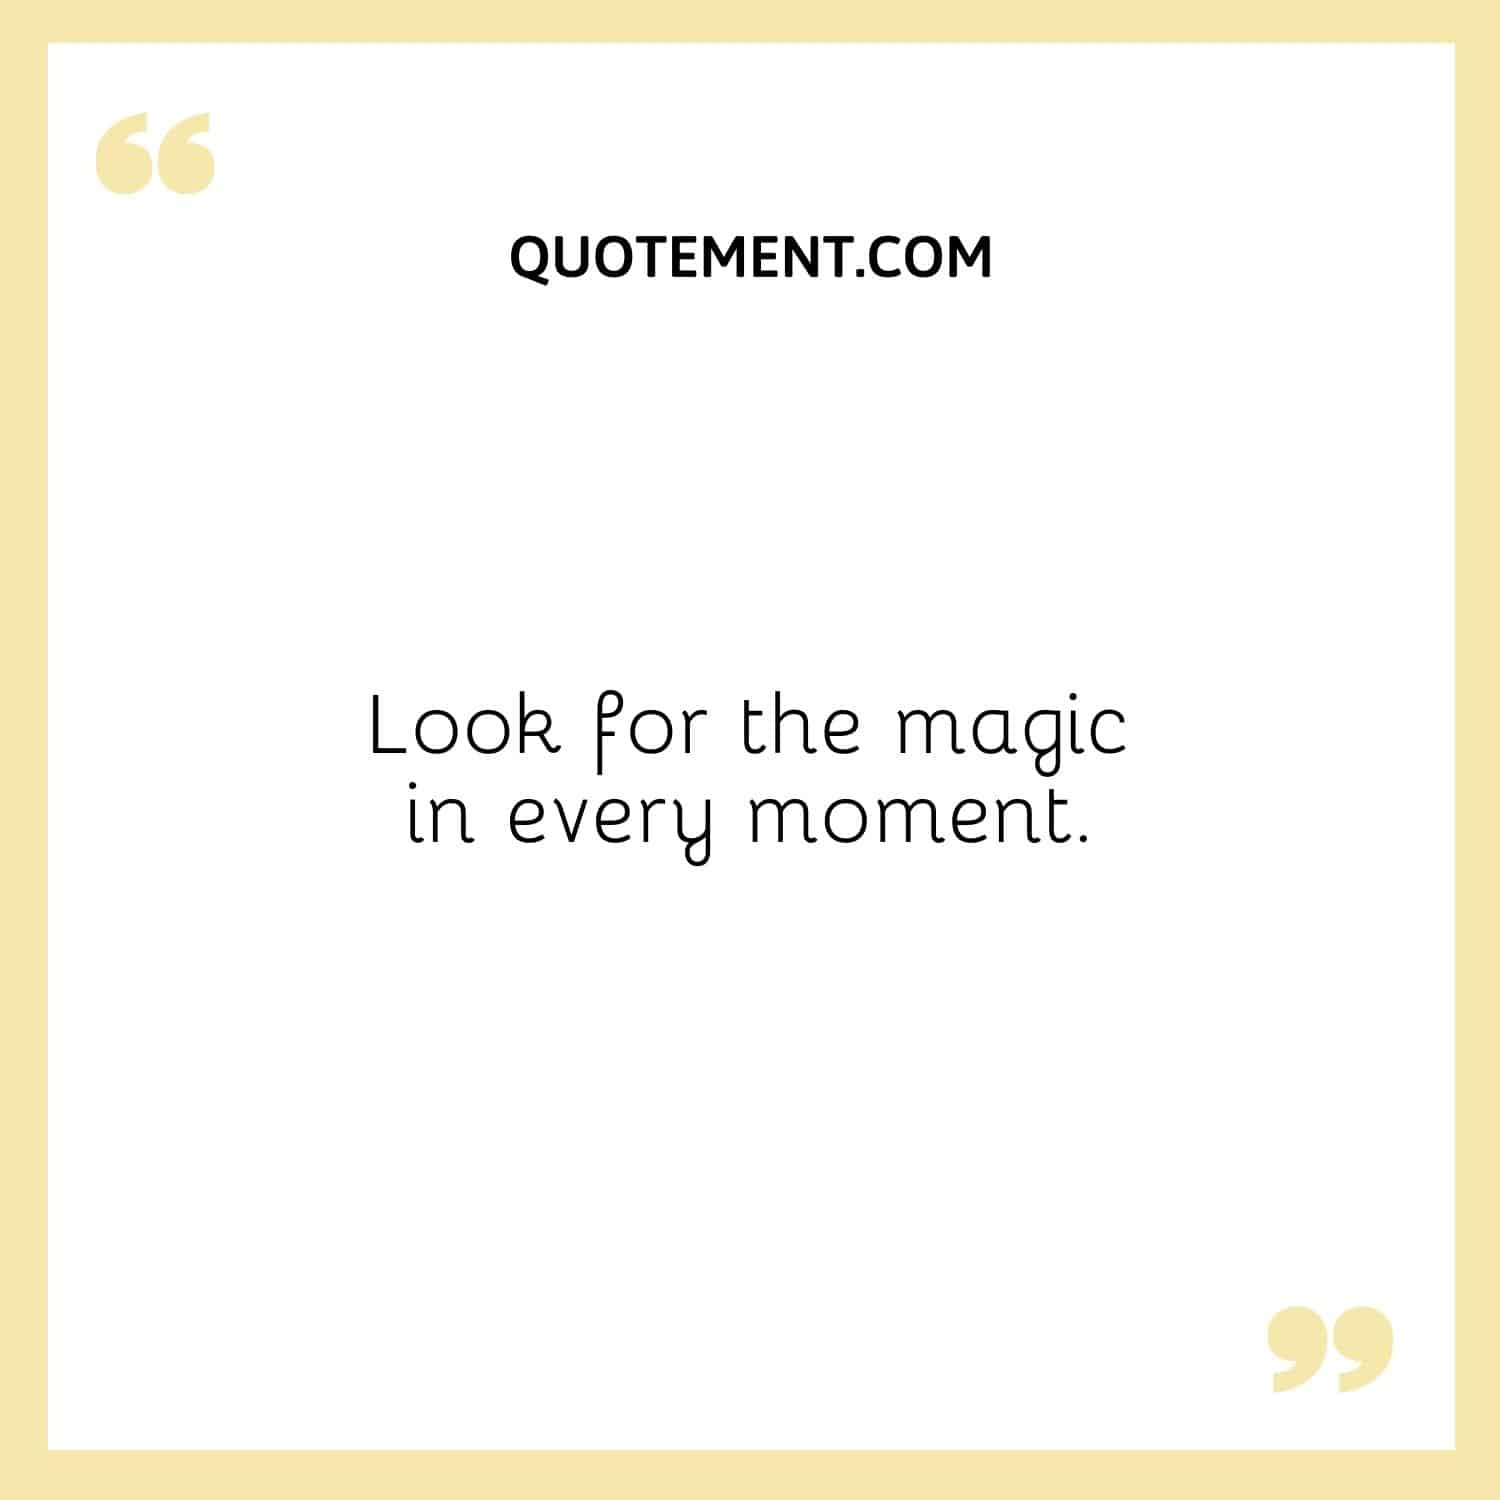 Look for the magic in every moment.